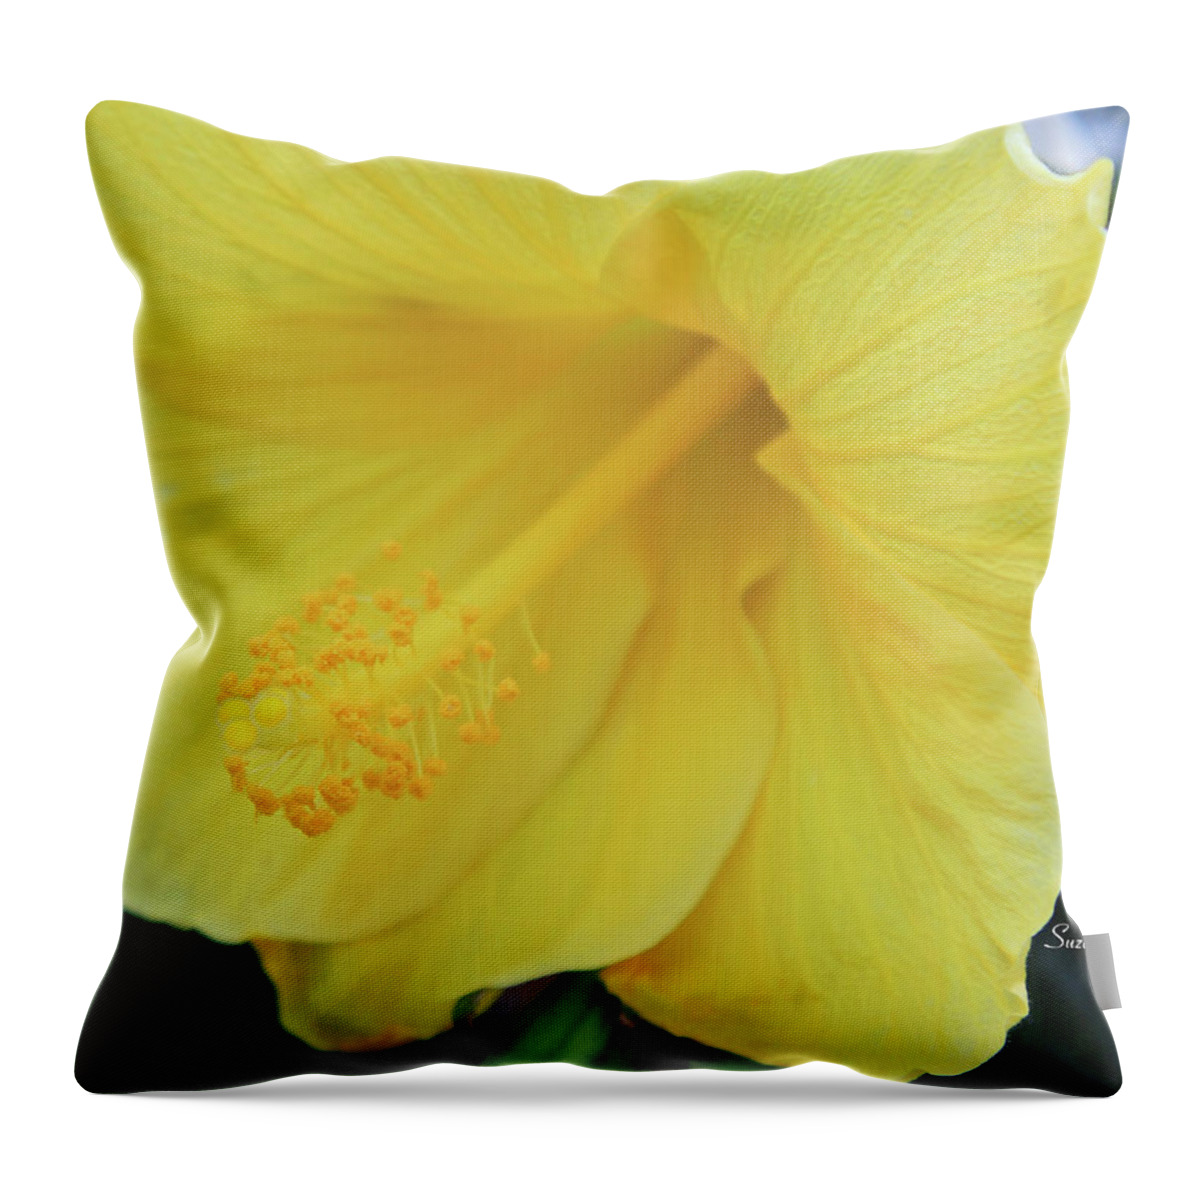 Hibiscus Throw Pillow featuring the photograph Yellow Hibiscus by Suzanne Gaff